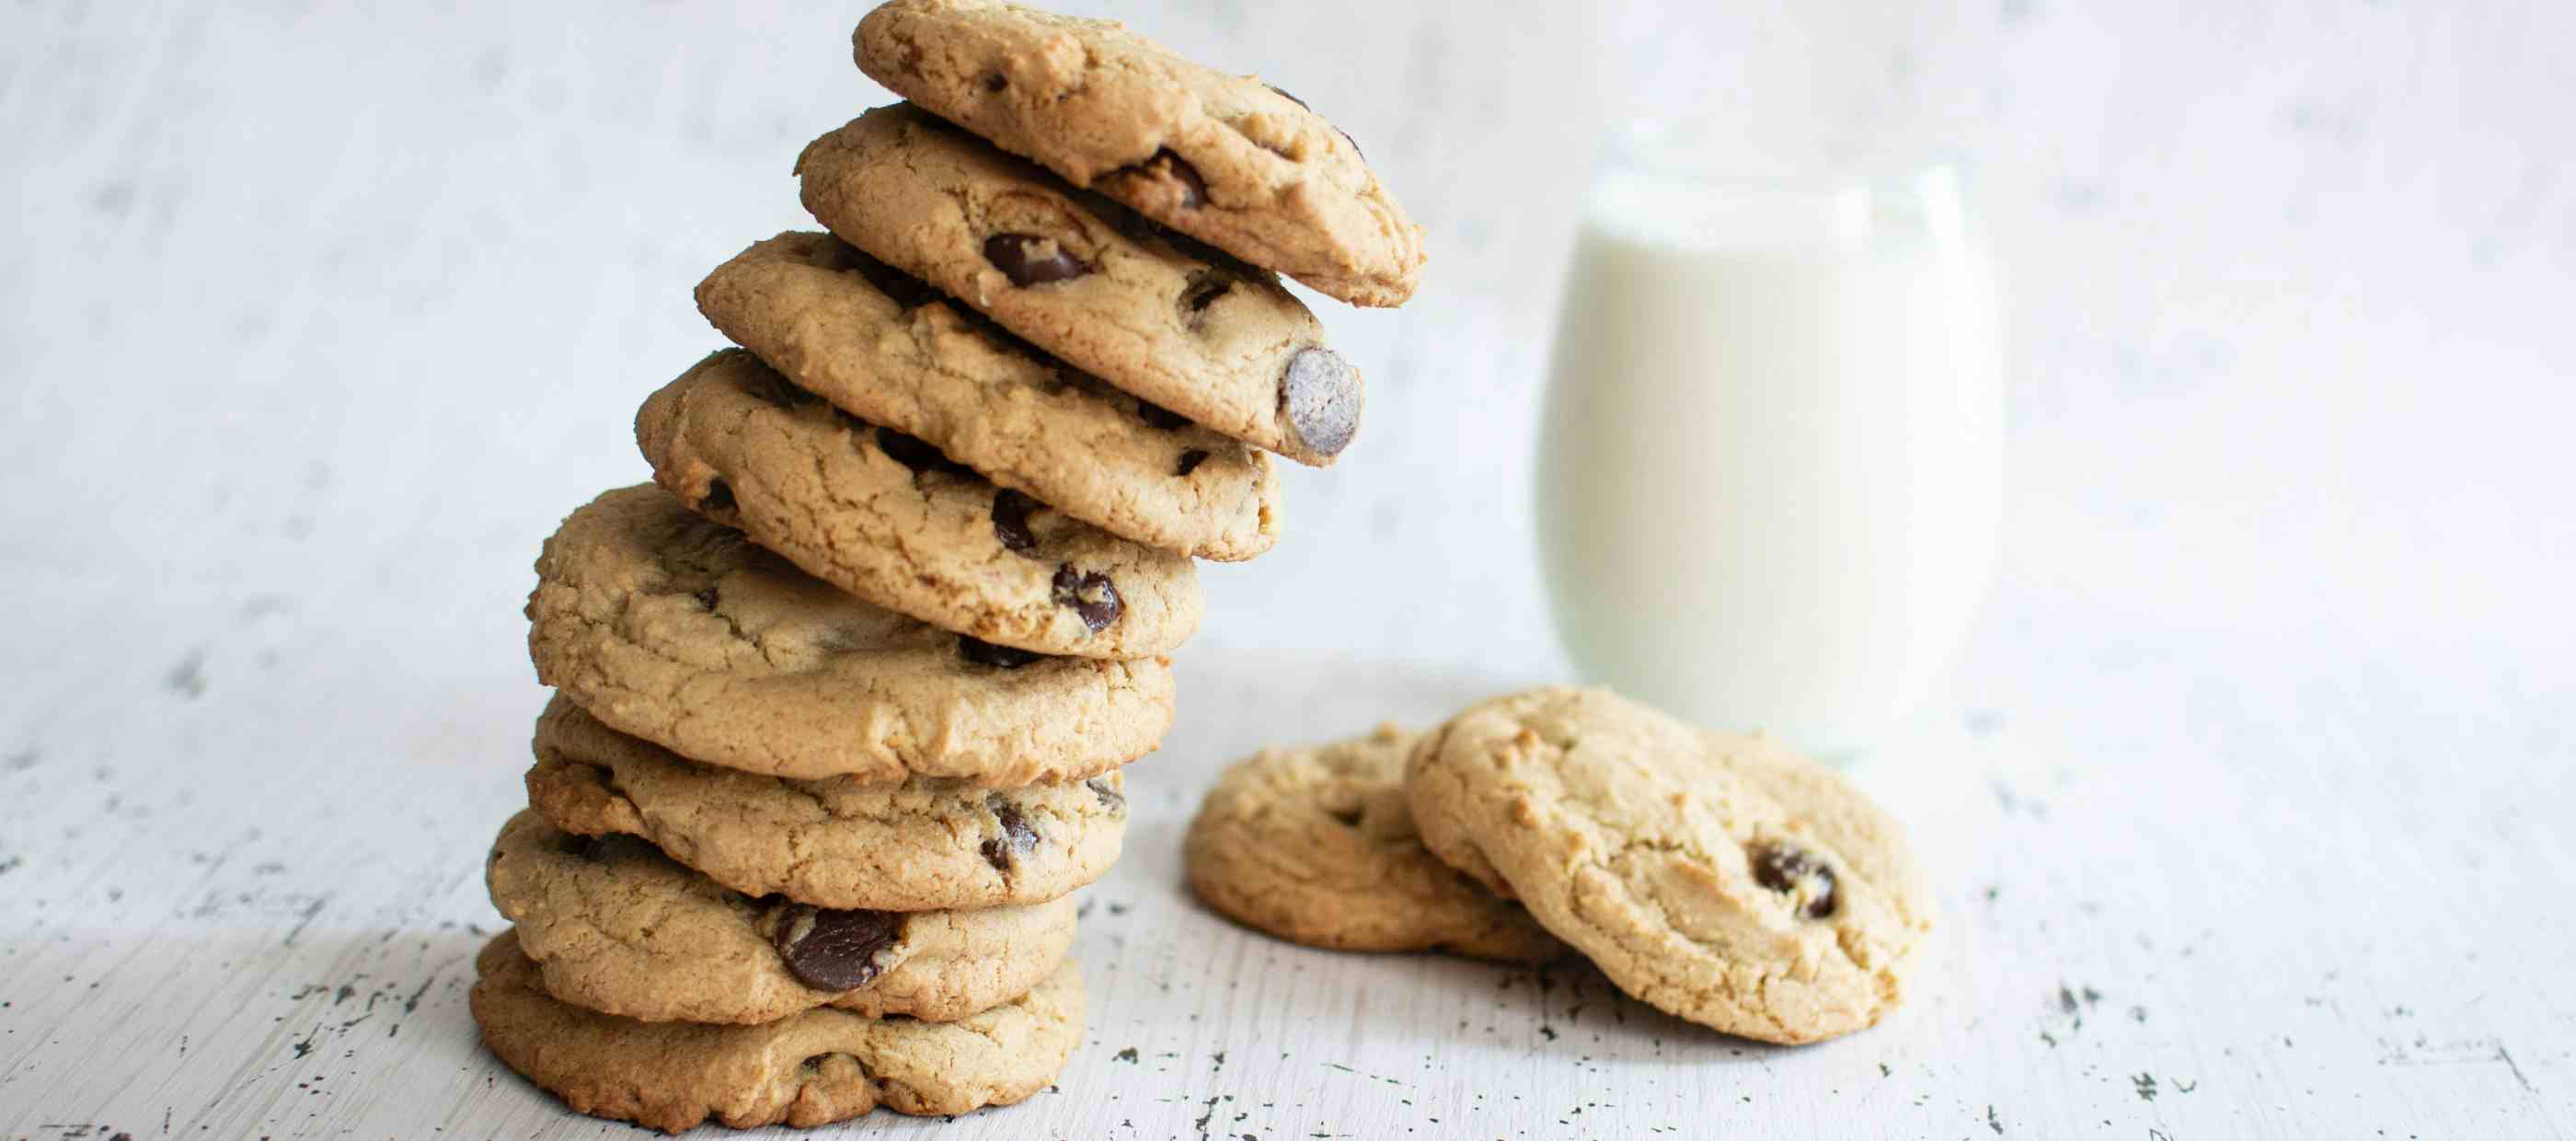 Stack of cookies next to a glass of milk